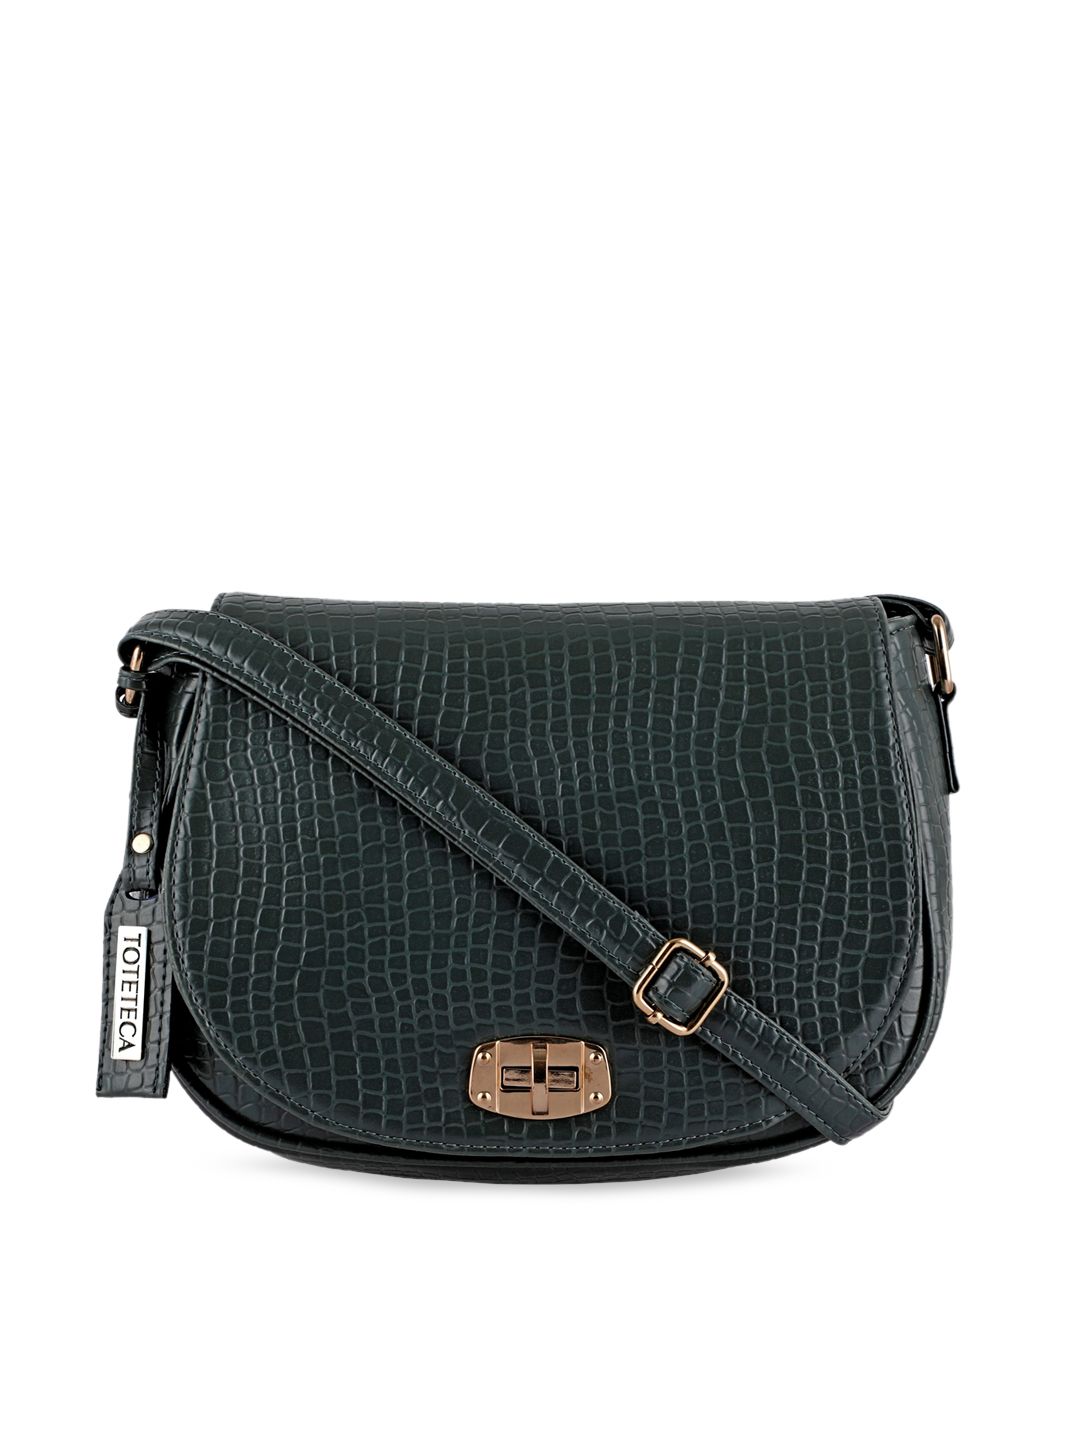 Toteteca Green Croco Textured PU Structured Sling Bag Price in India